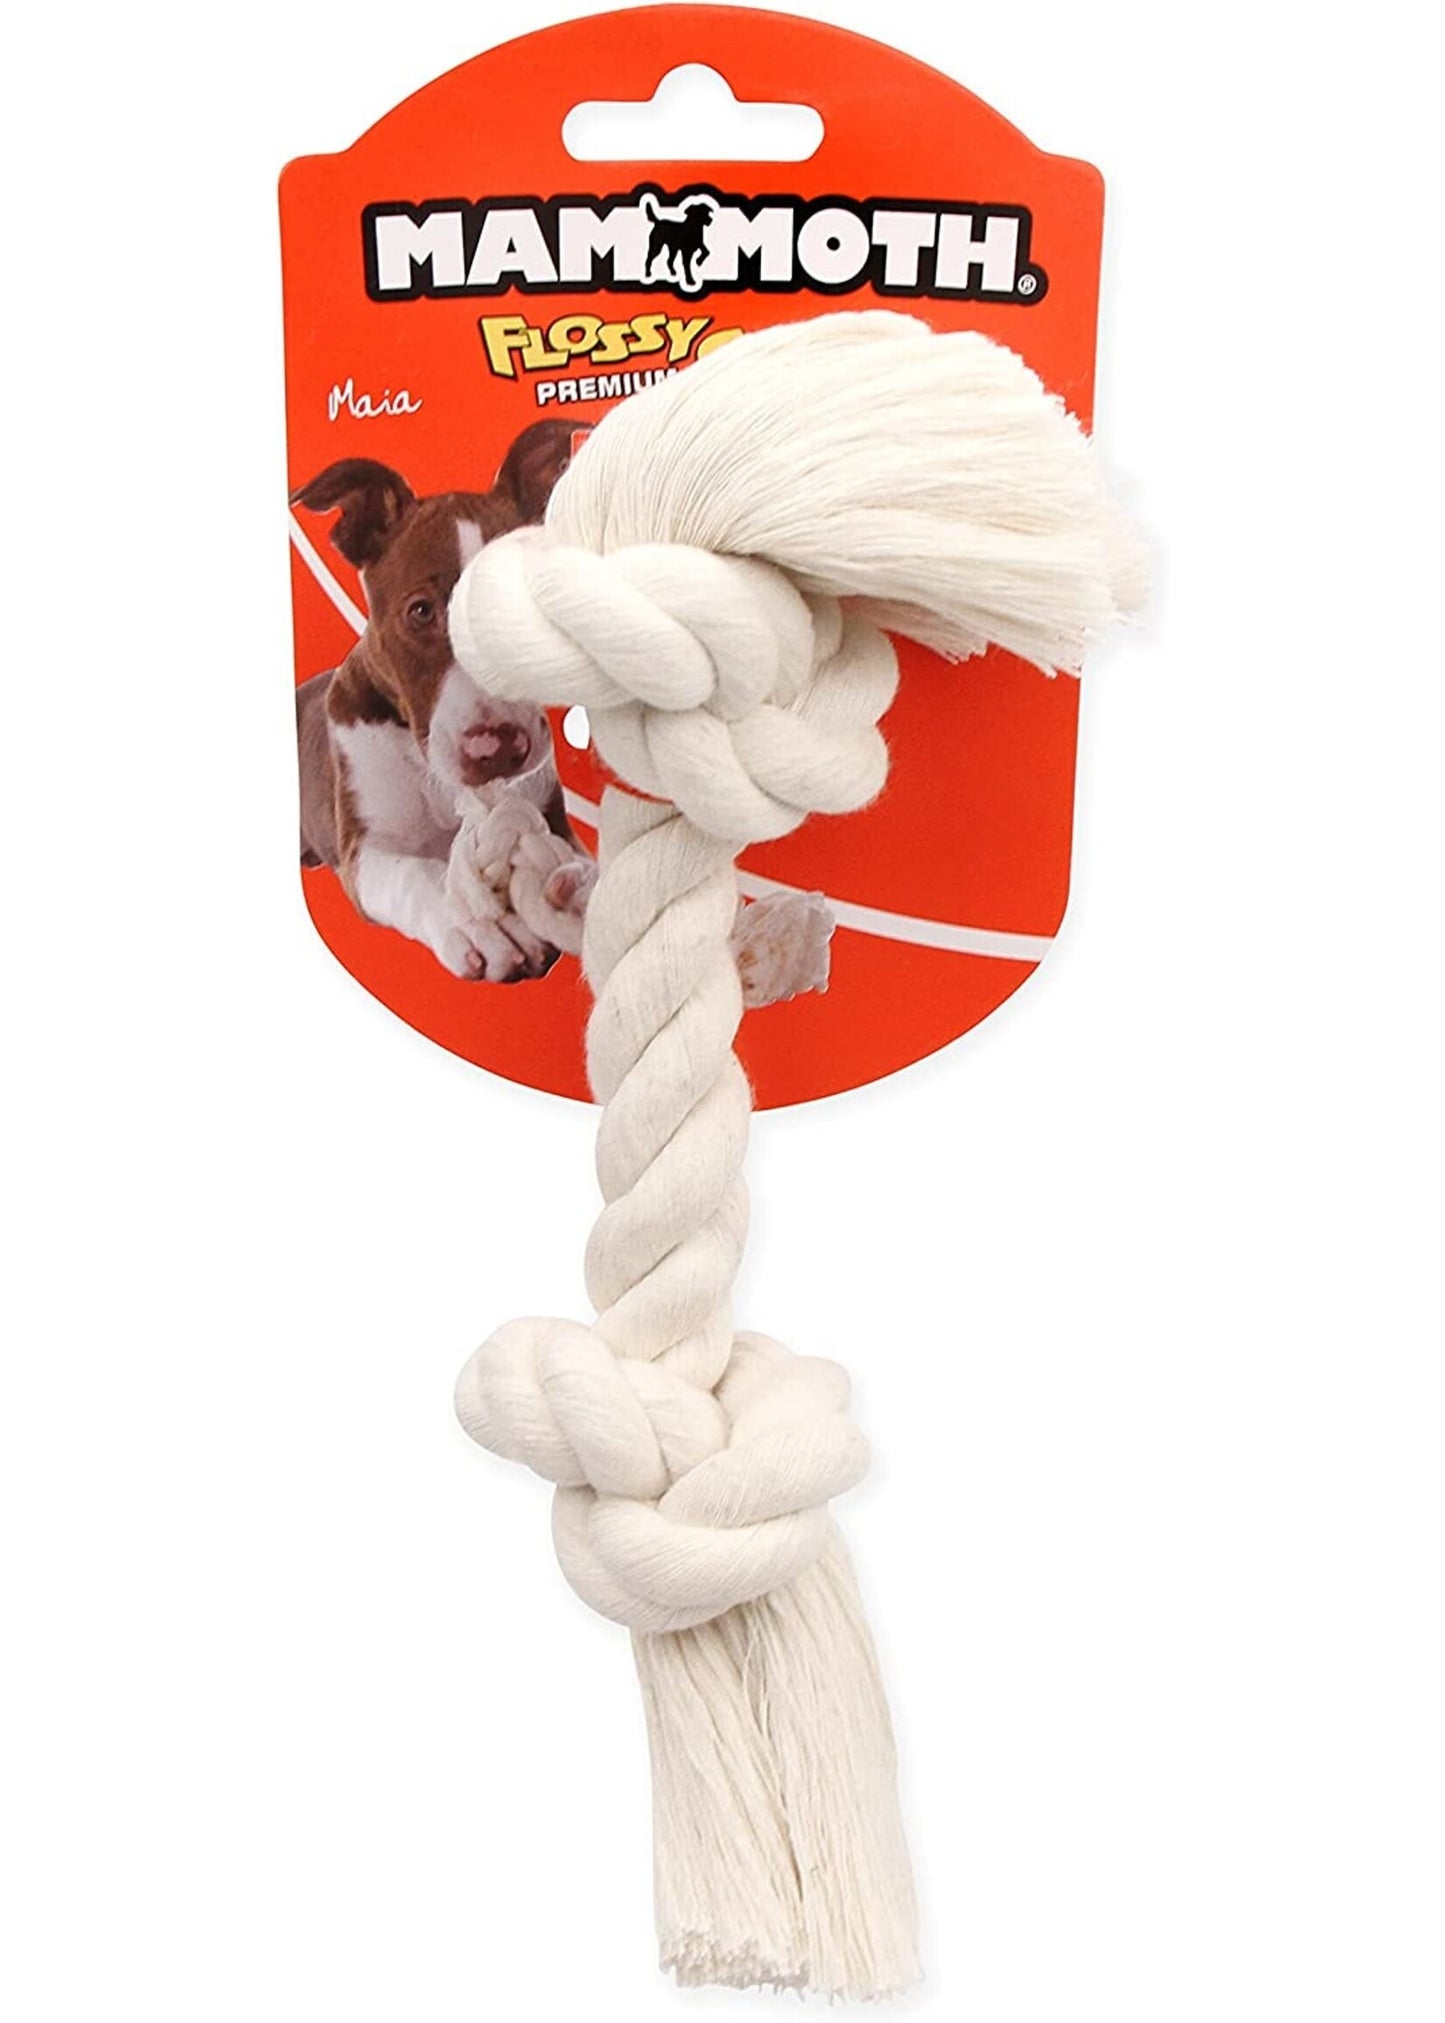 Mammoth - 2 knot - Flossy Rope Tug Toy